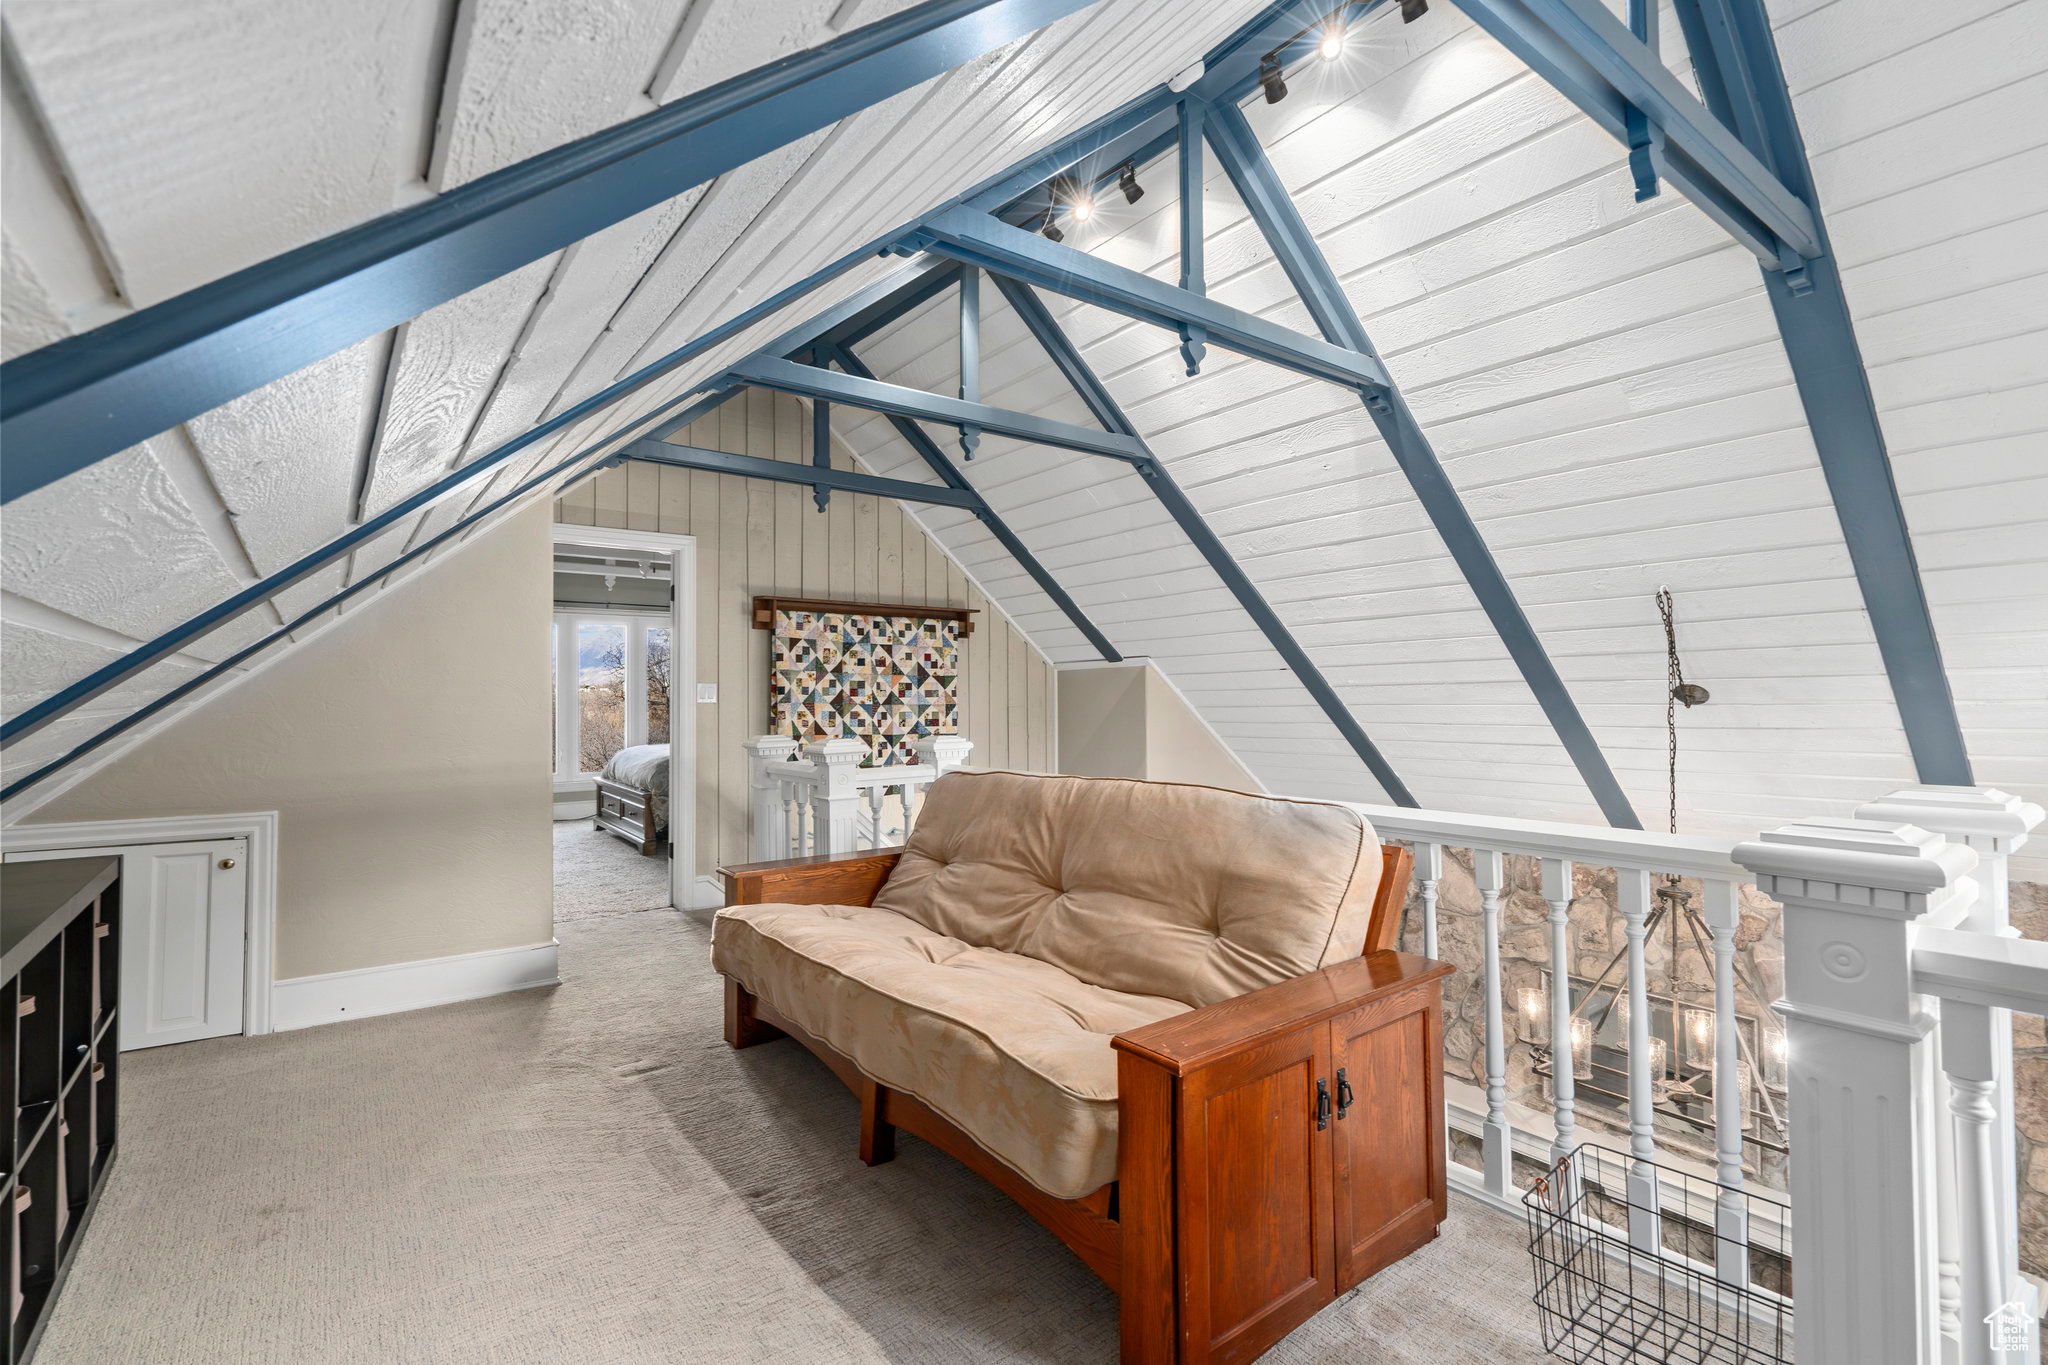 Additional living space with lofted ceiling, wooden walls, and carpet flooring overlooking the vaulted greatroom.